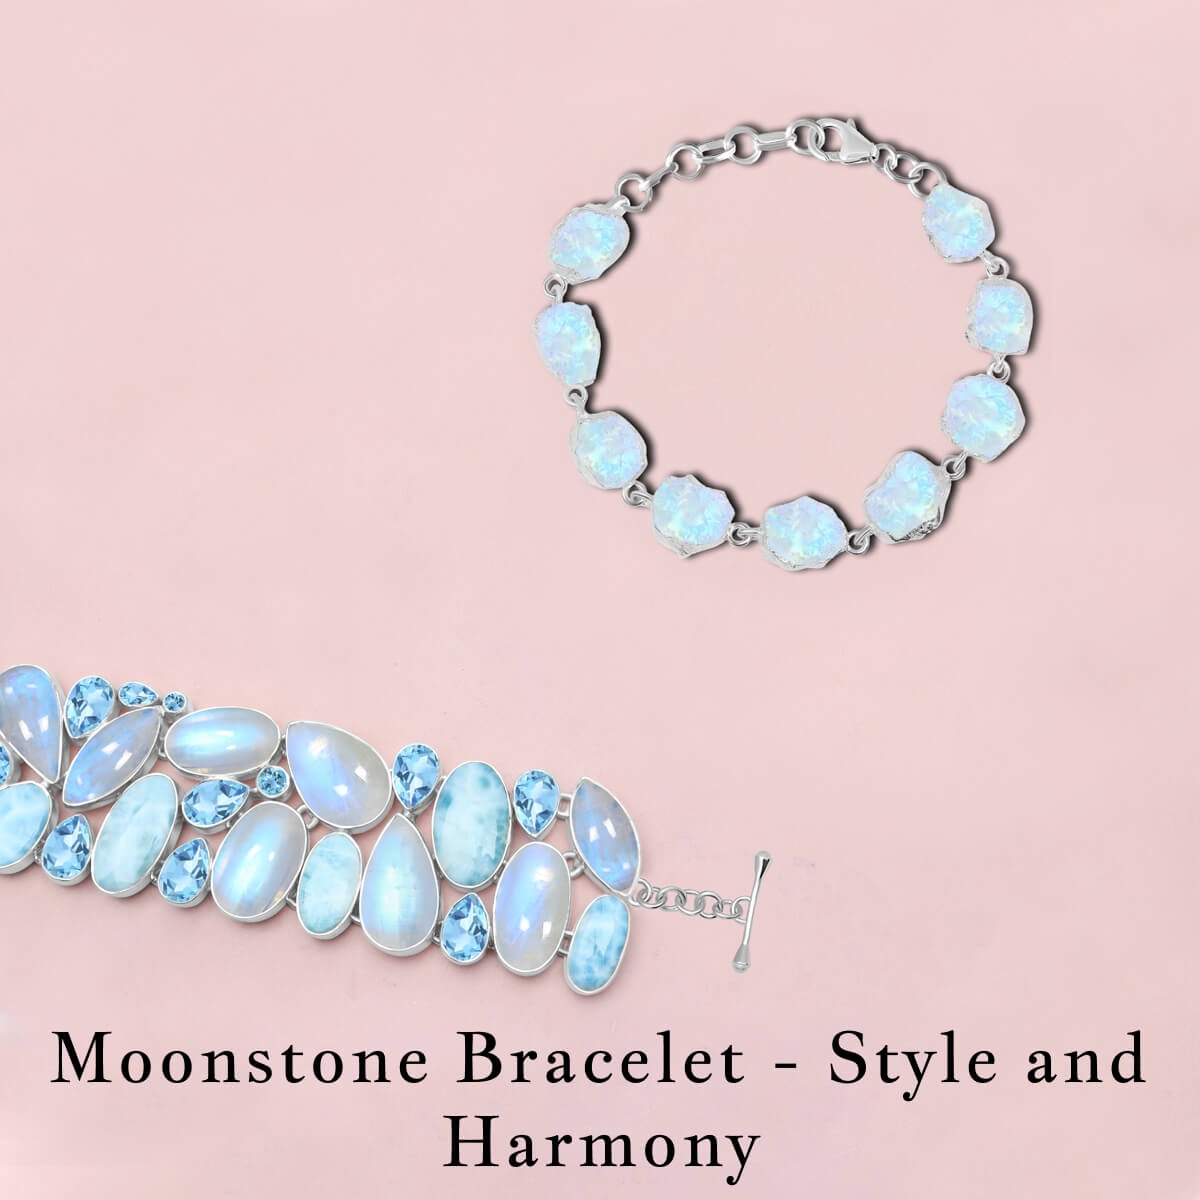 How to use your moonstone bracelet